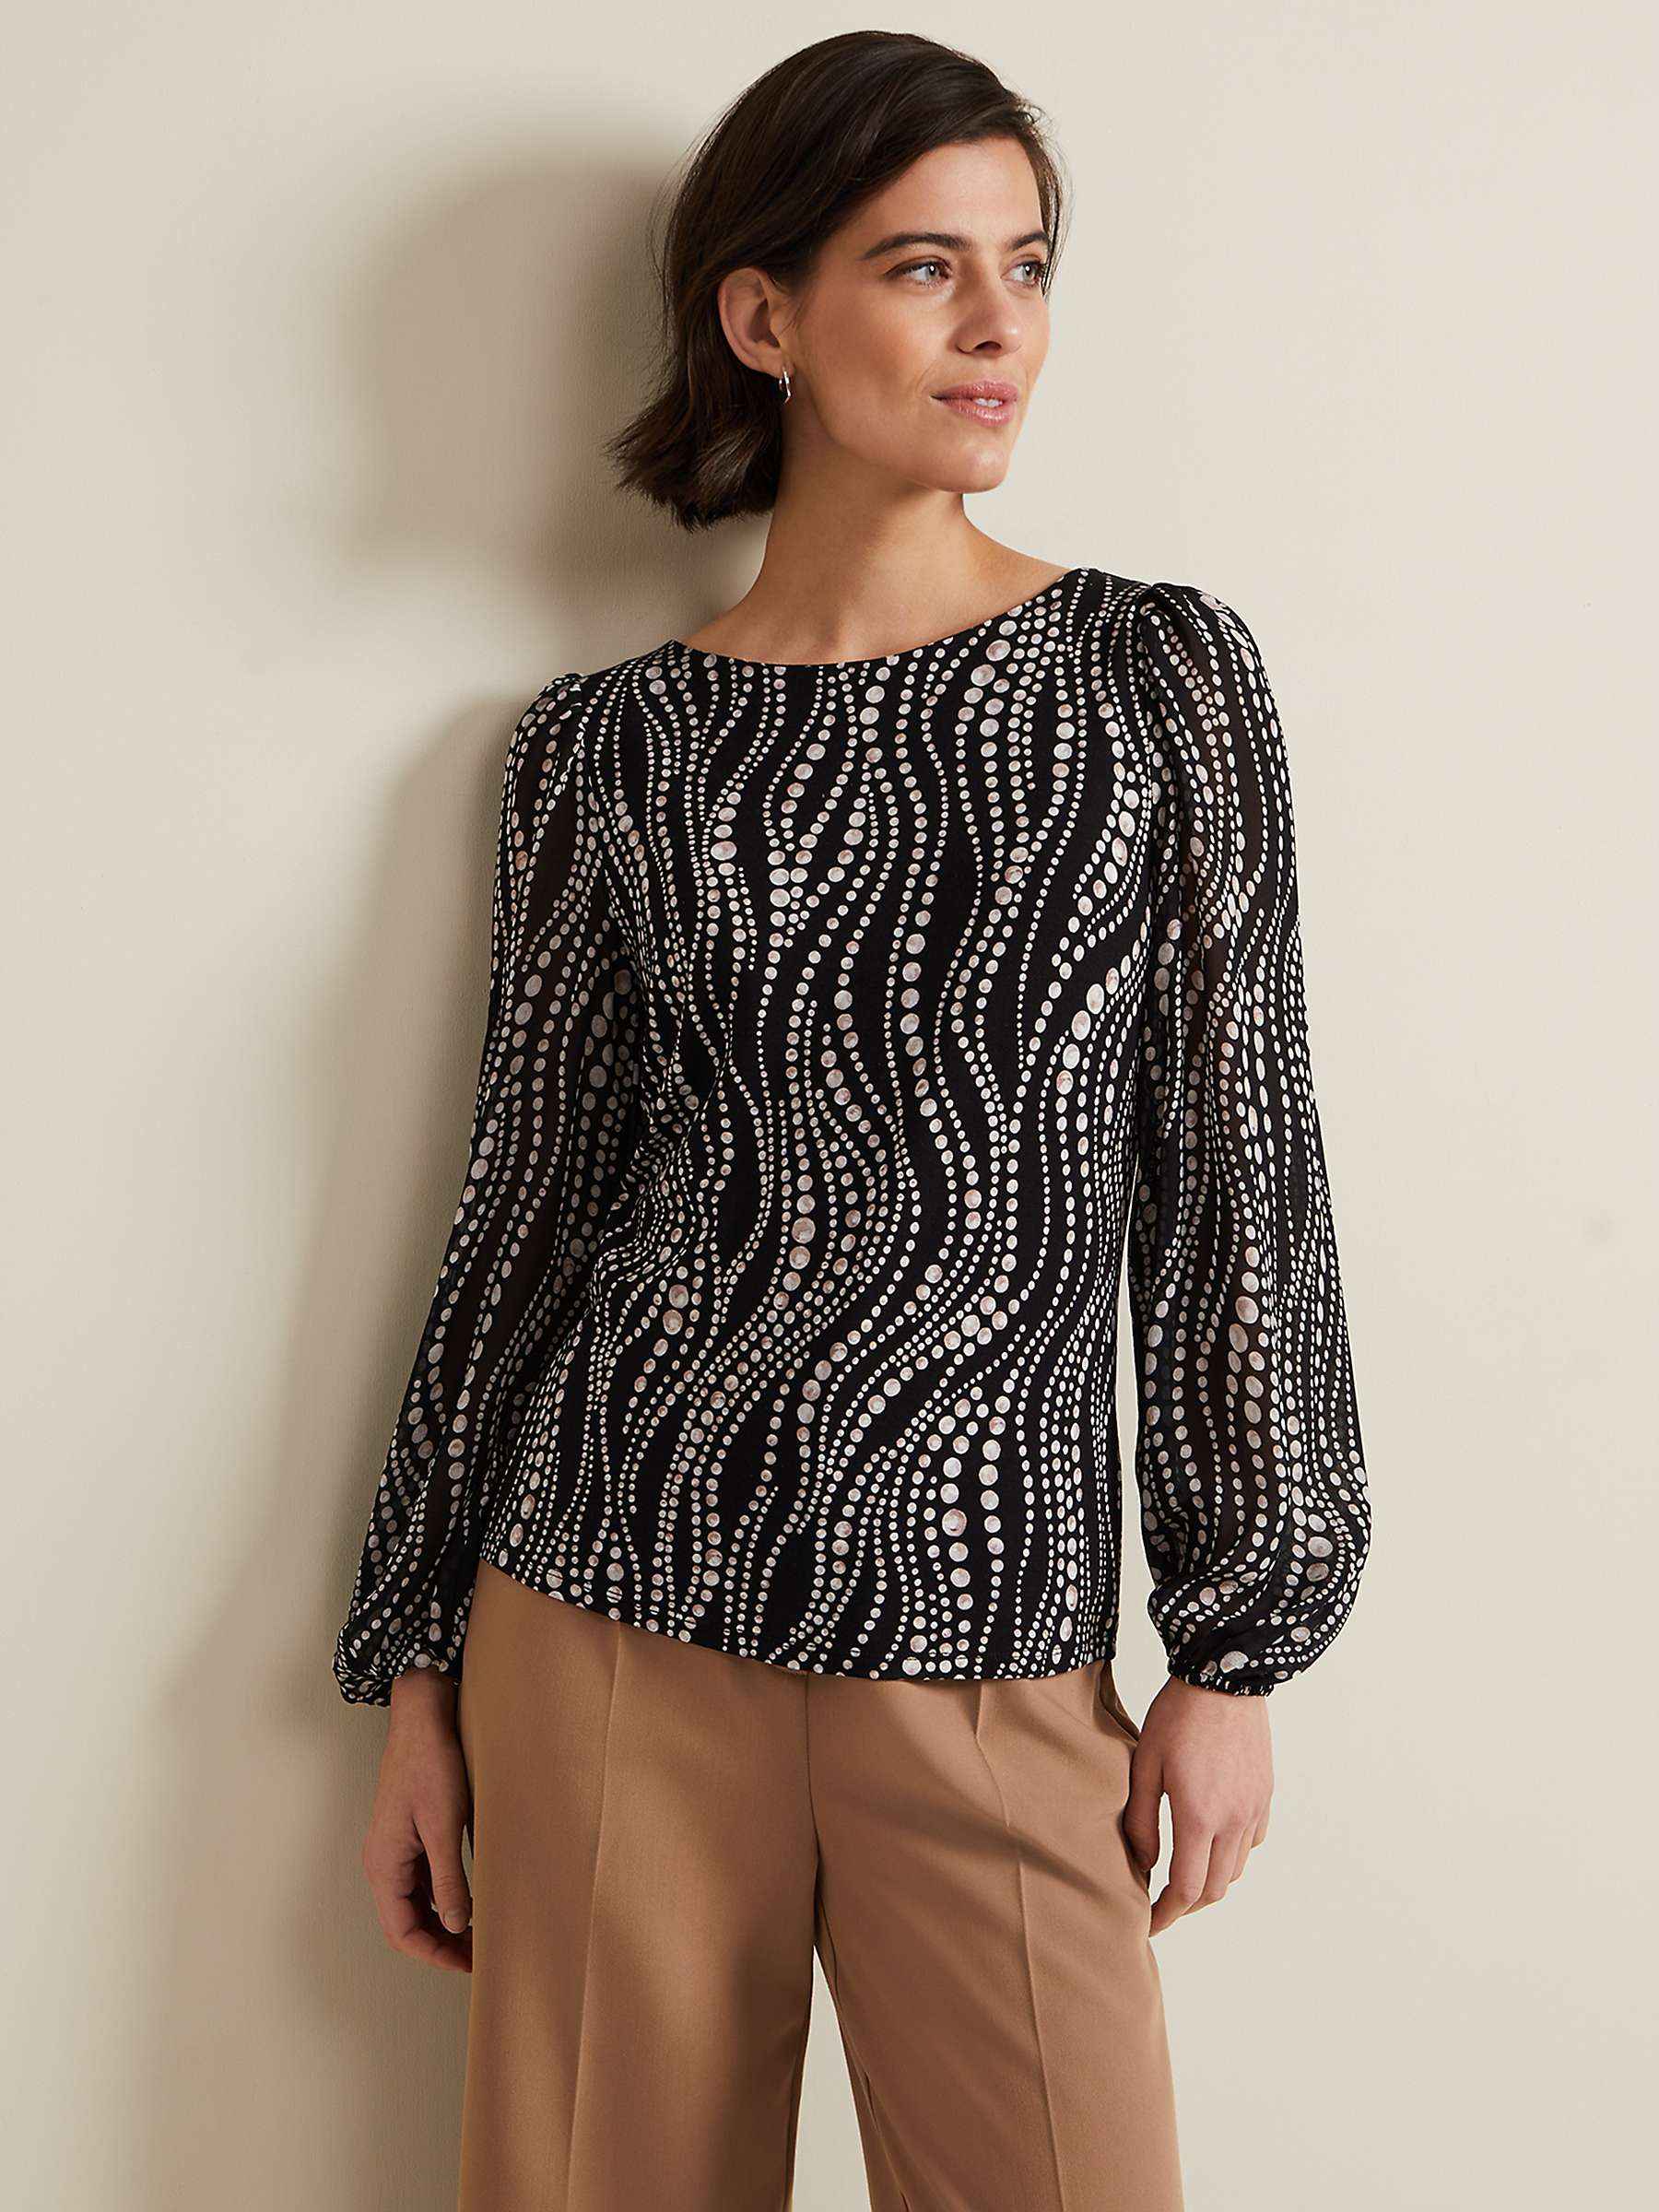 Buy Phase Eight Patricia Pearl Print Blouse, Black Online at johnlewis.com